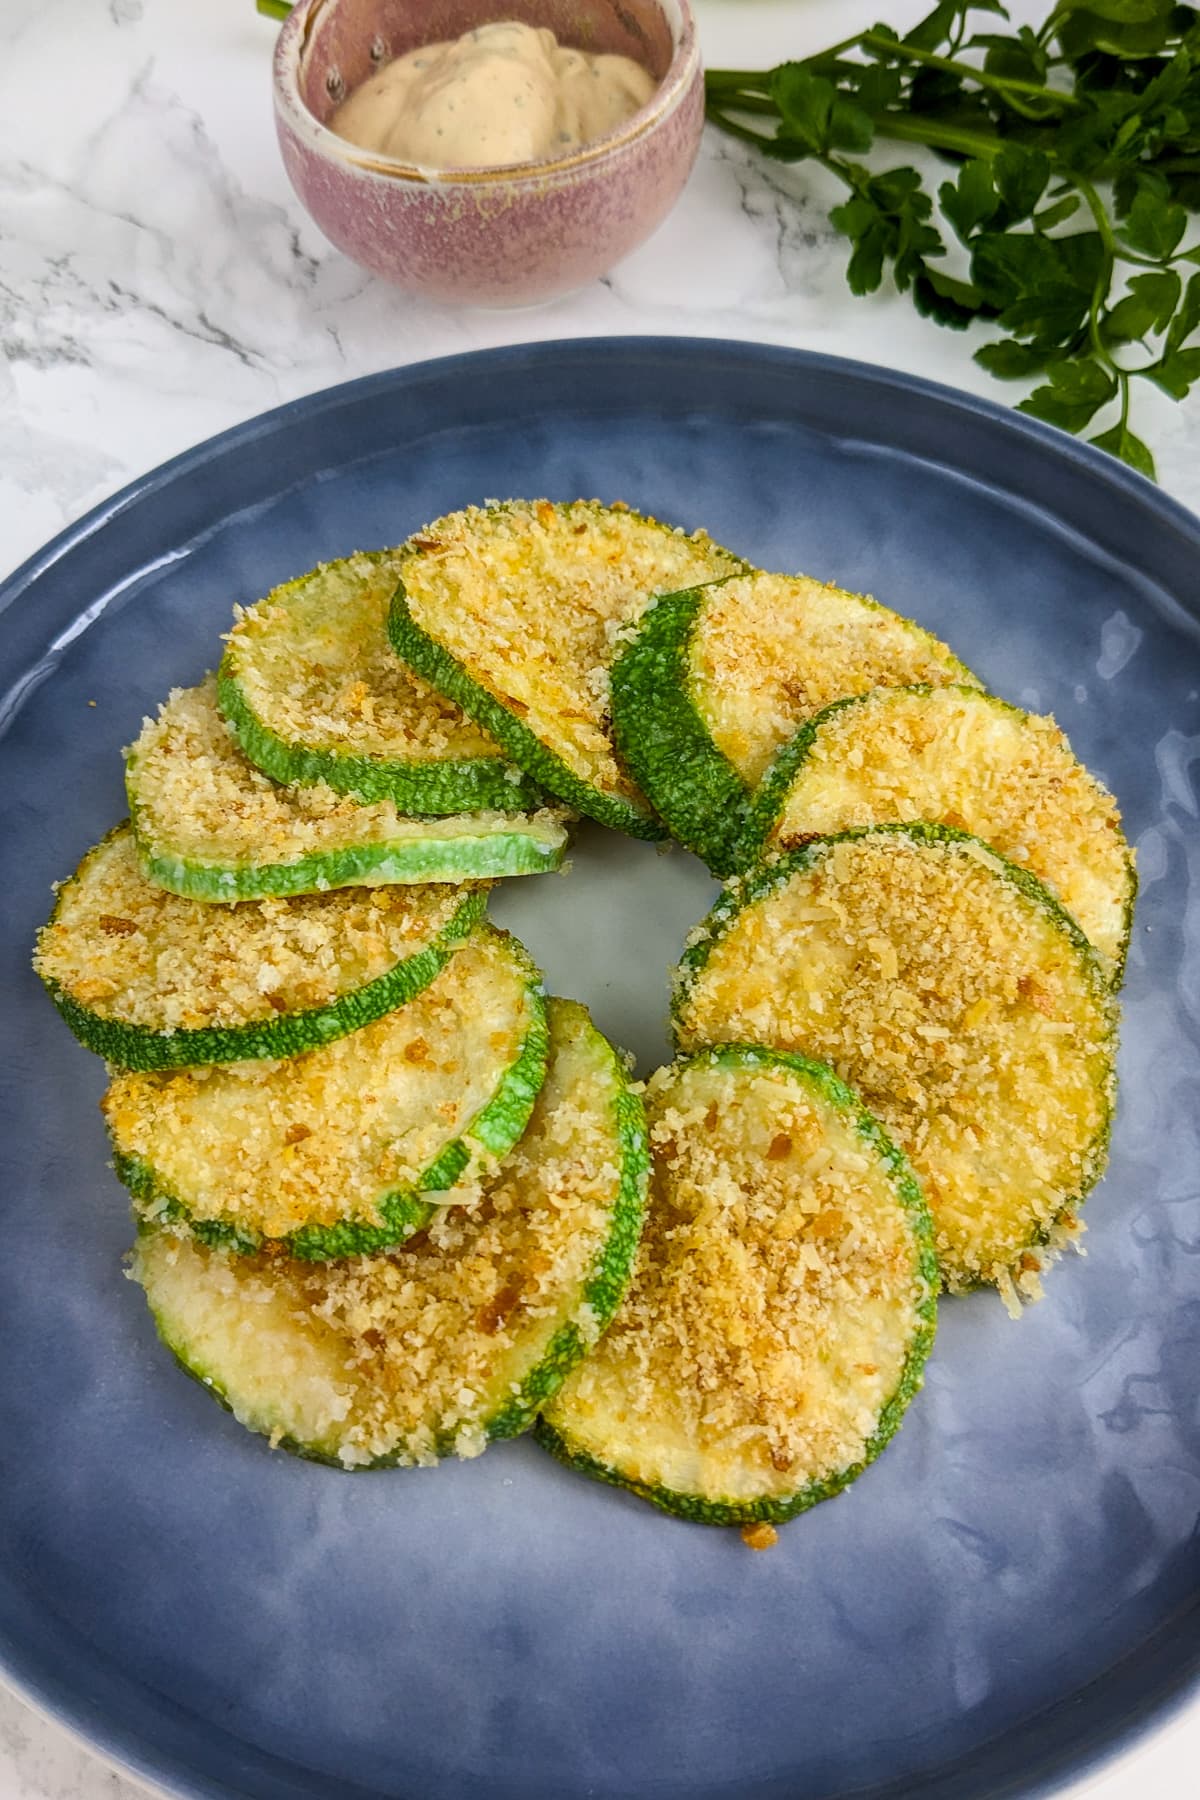 Elegantly served zucchini casserole slices on a blue plate.